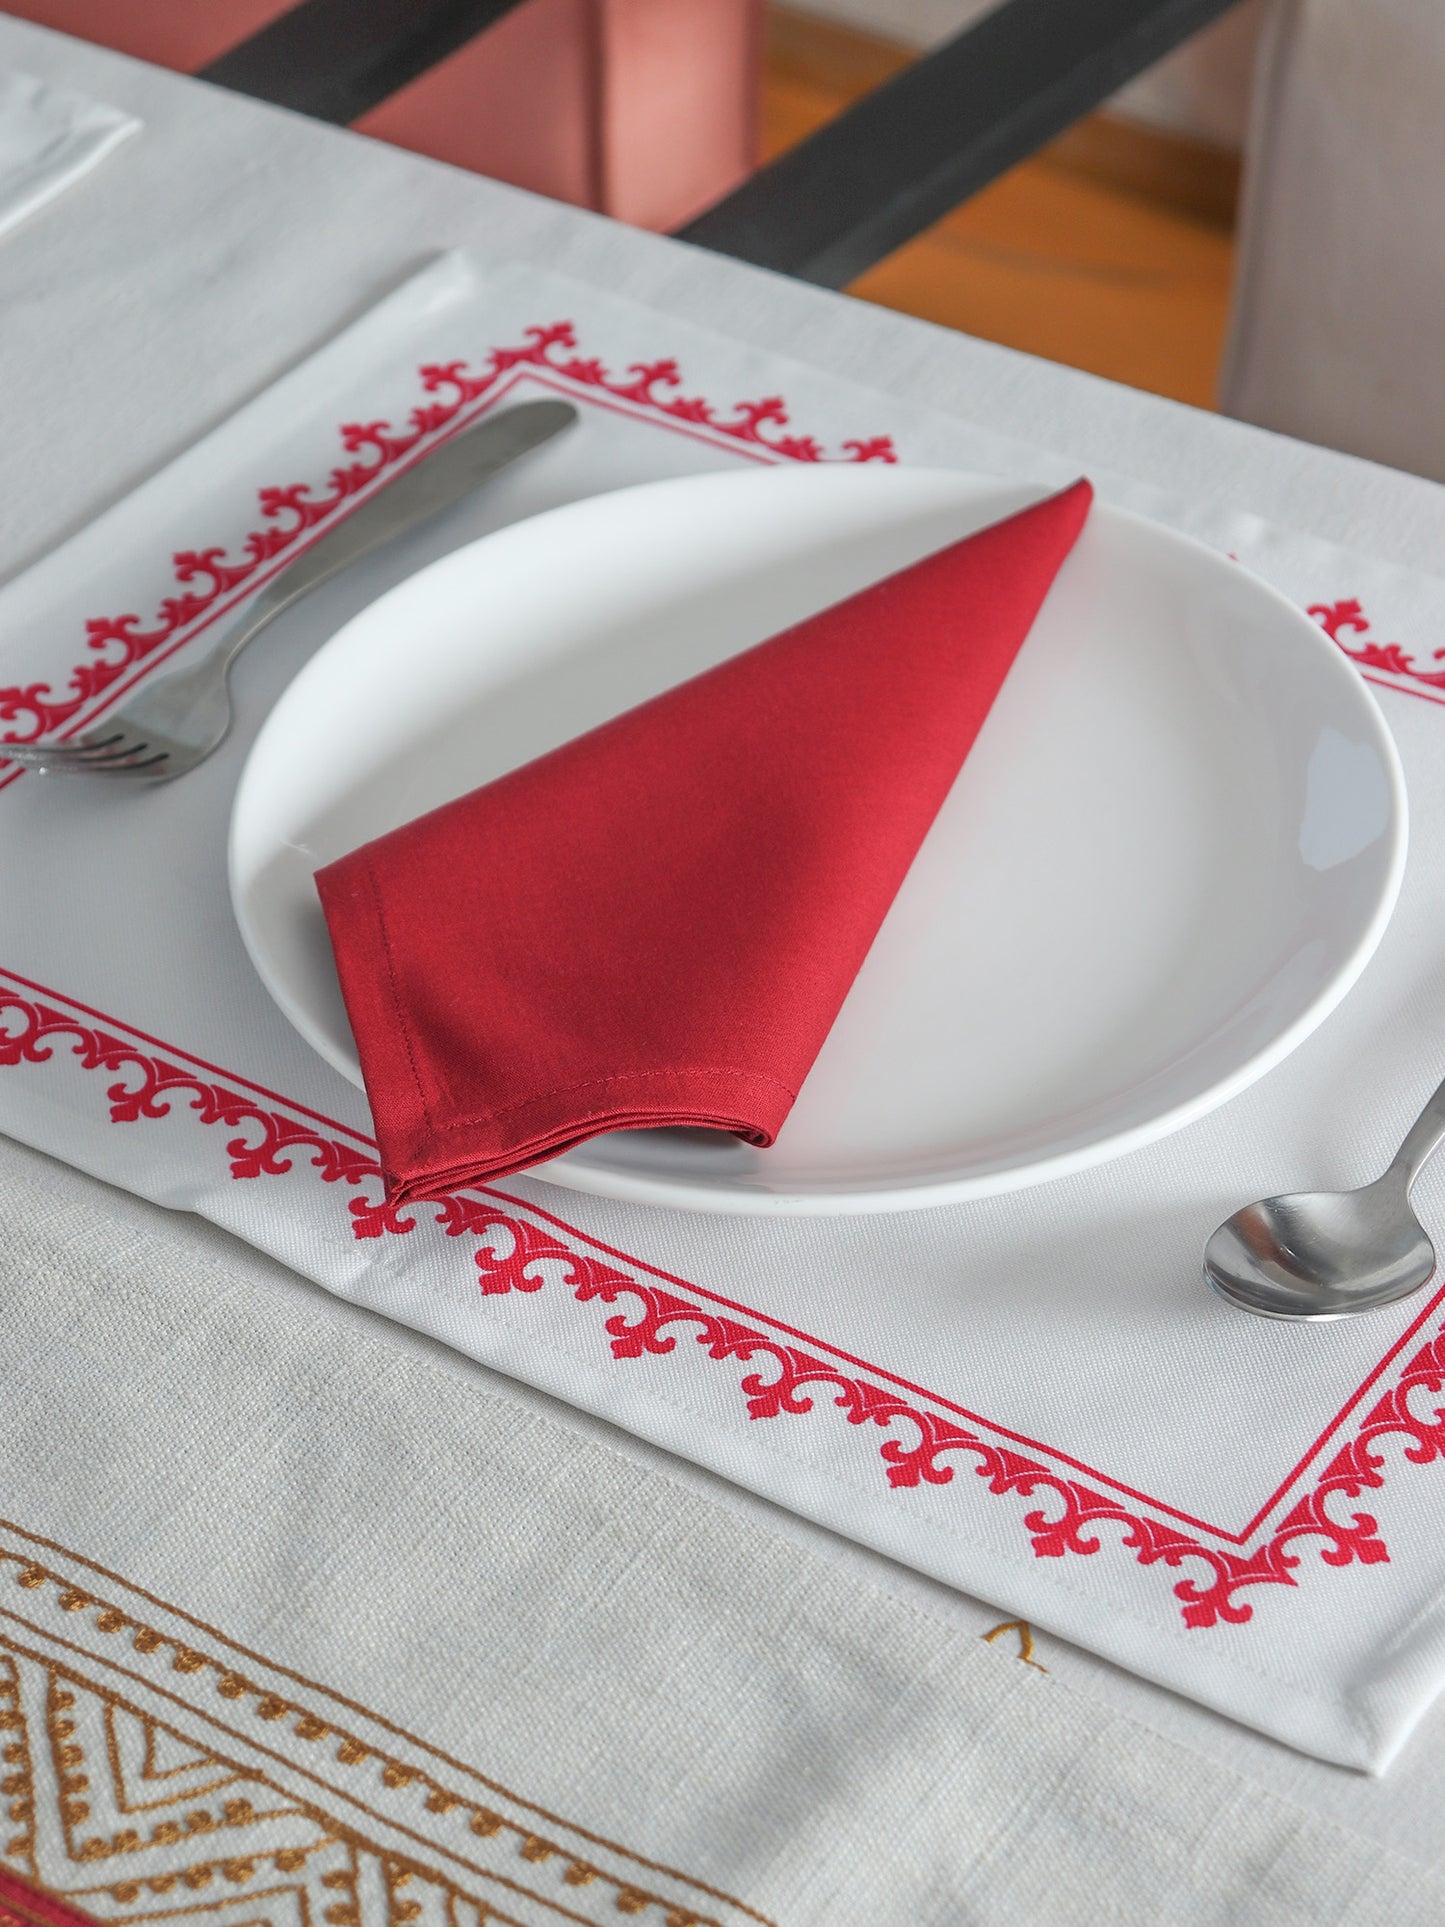 motif printed dinner tablemats and cotton napkins in red and white contrast colors - 13x19 inch